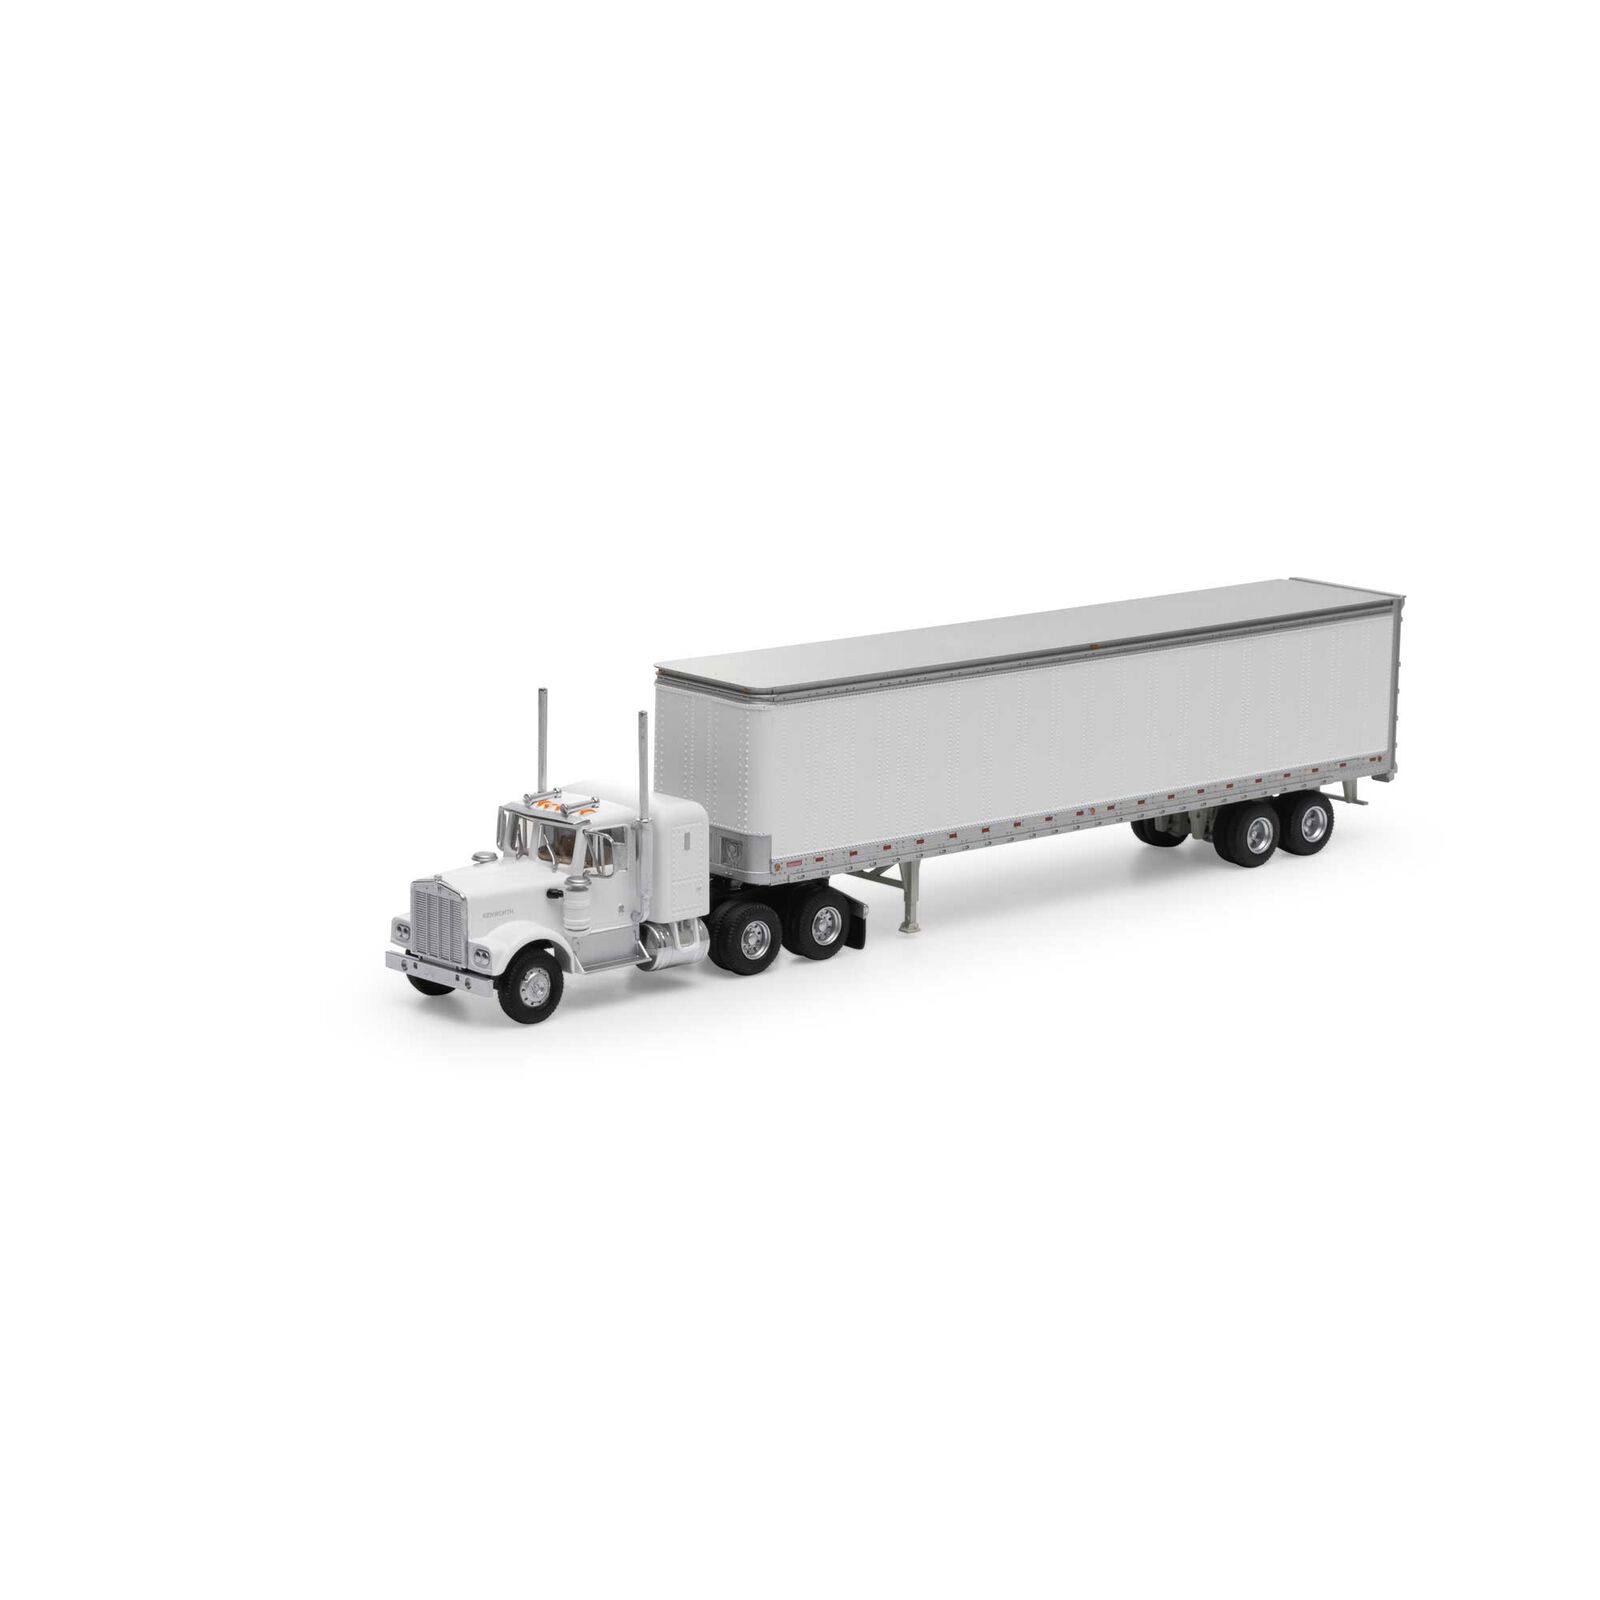 Athearn RTR 41087 - HO Kenworth Tractor & Trailer - White